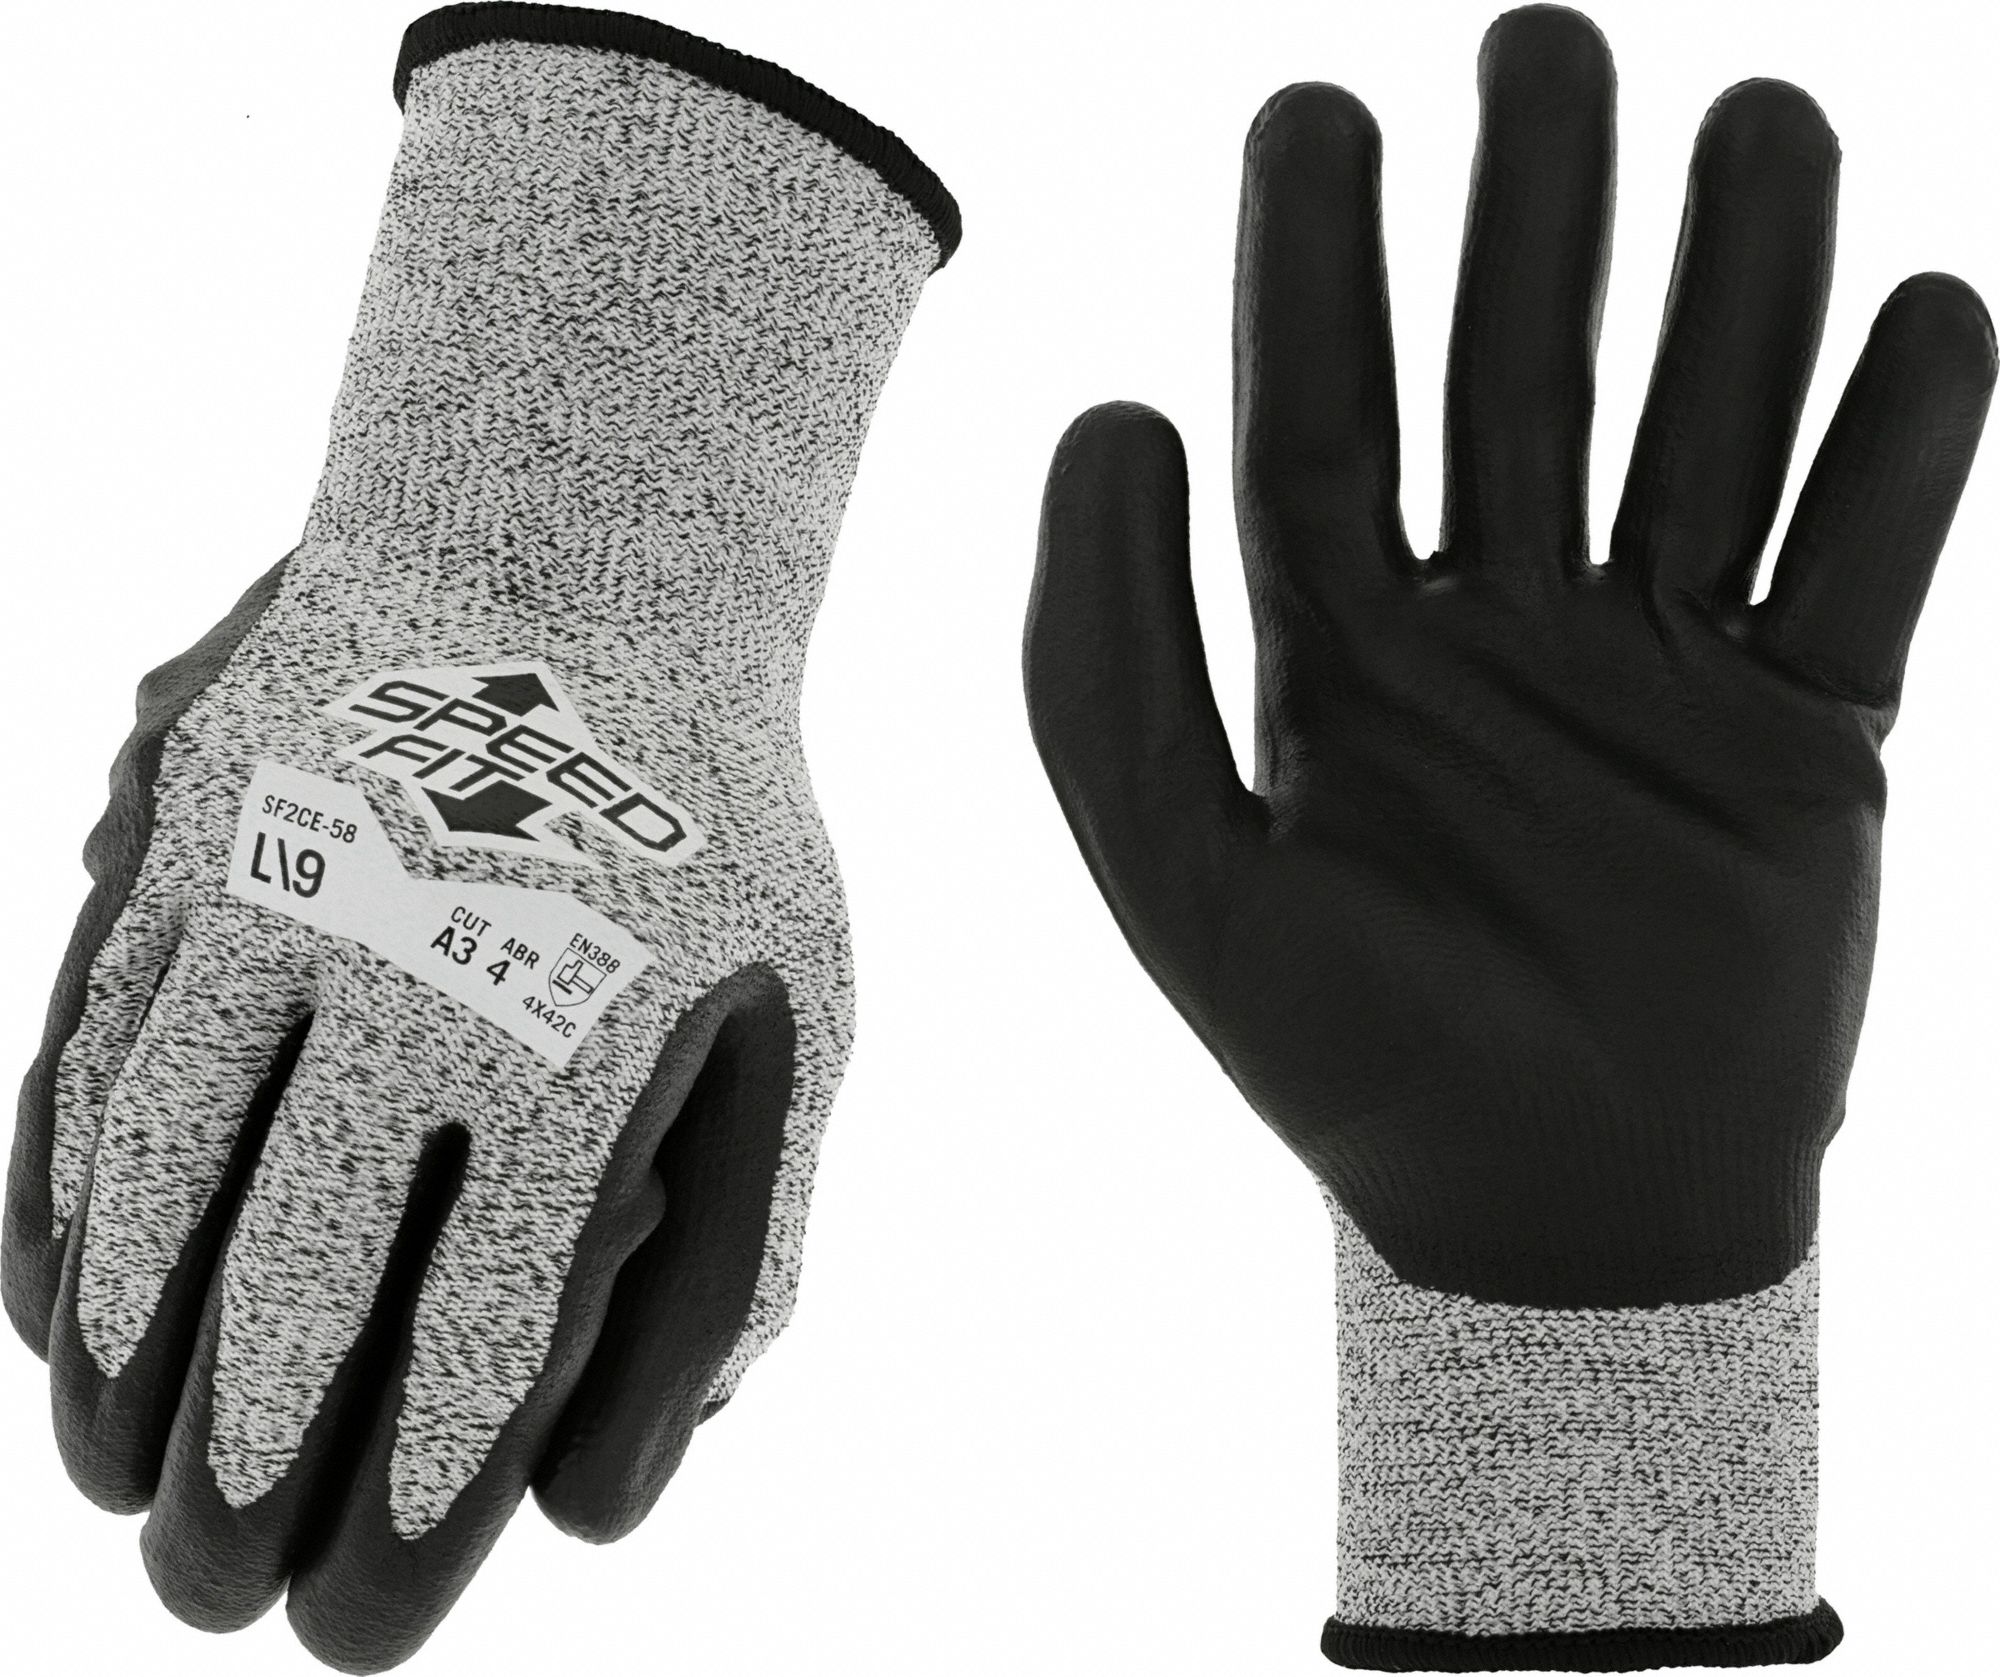 MECHANIX WEAR NITRILE COATED CUT-RESISTANT GLOVES, S, GRY, 8.19 IN LONG, 13  GA THICK, HPPE/NYLON - Knit General Purpose Gloves - MWXSF2CE58007